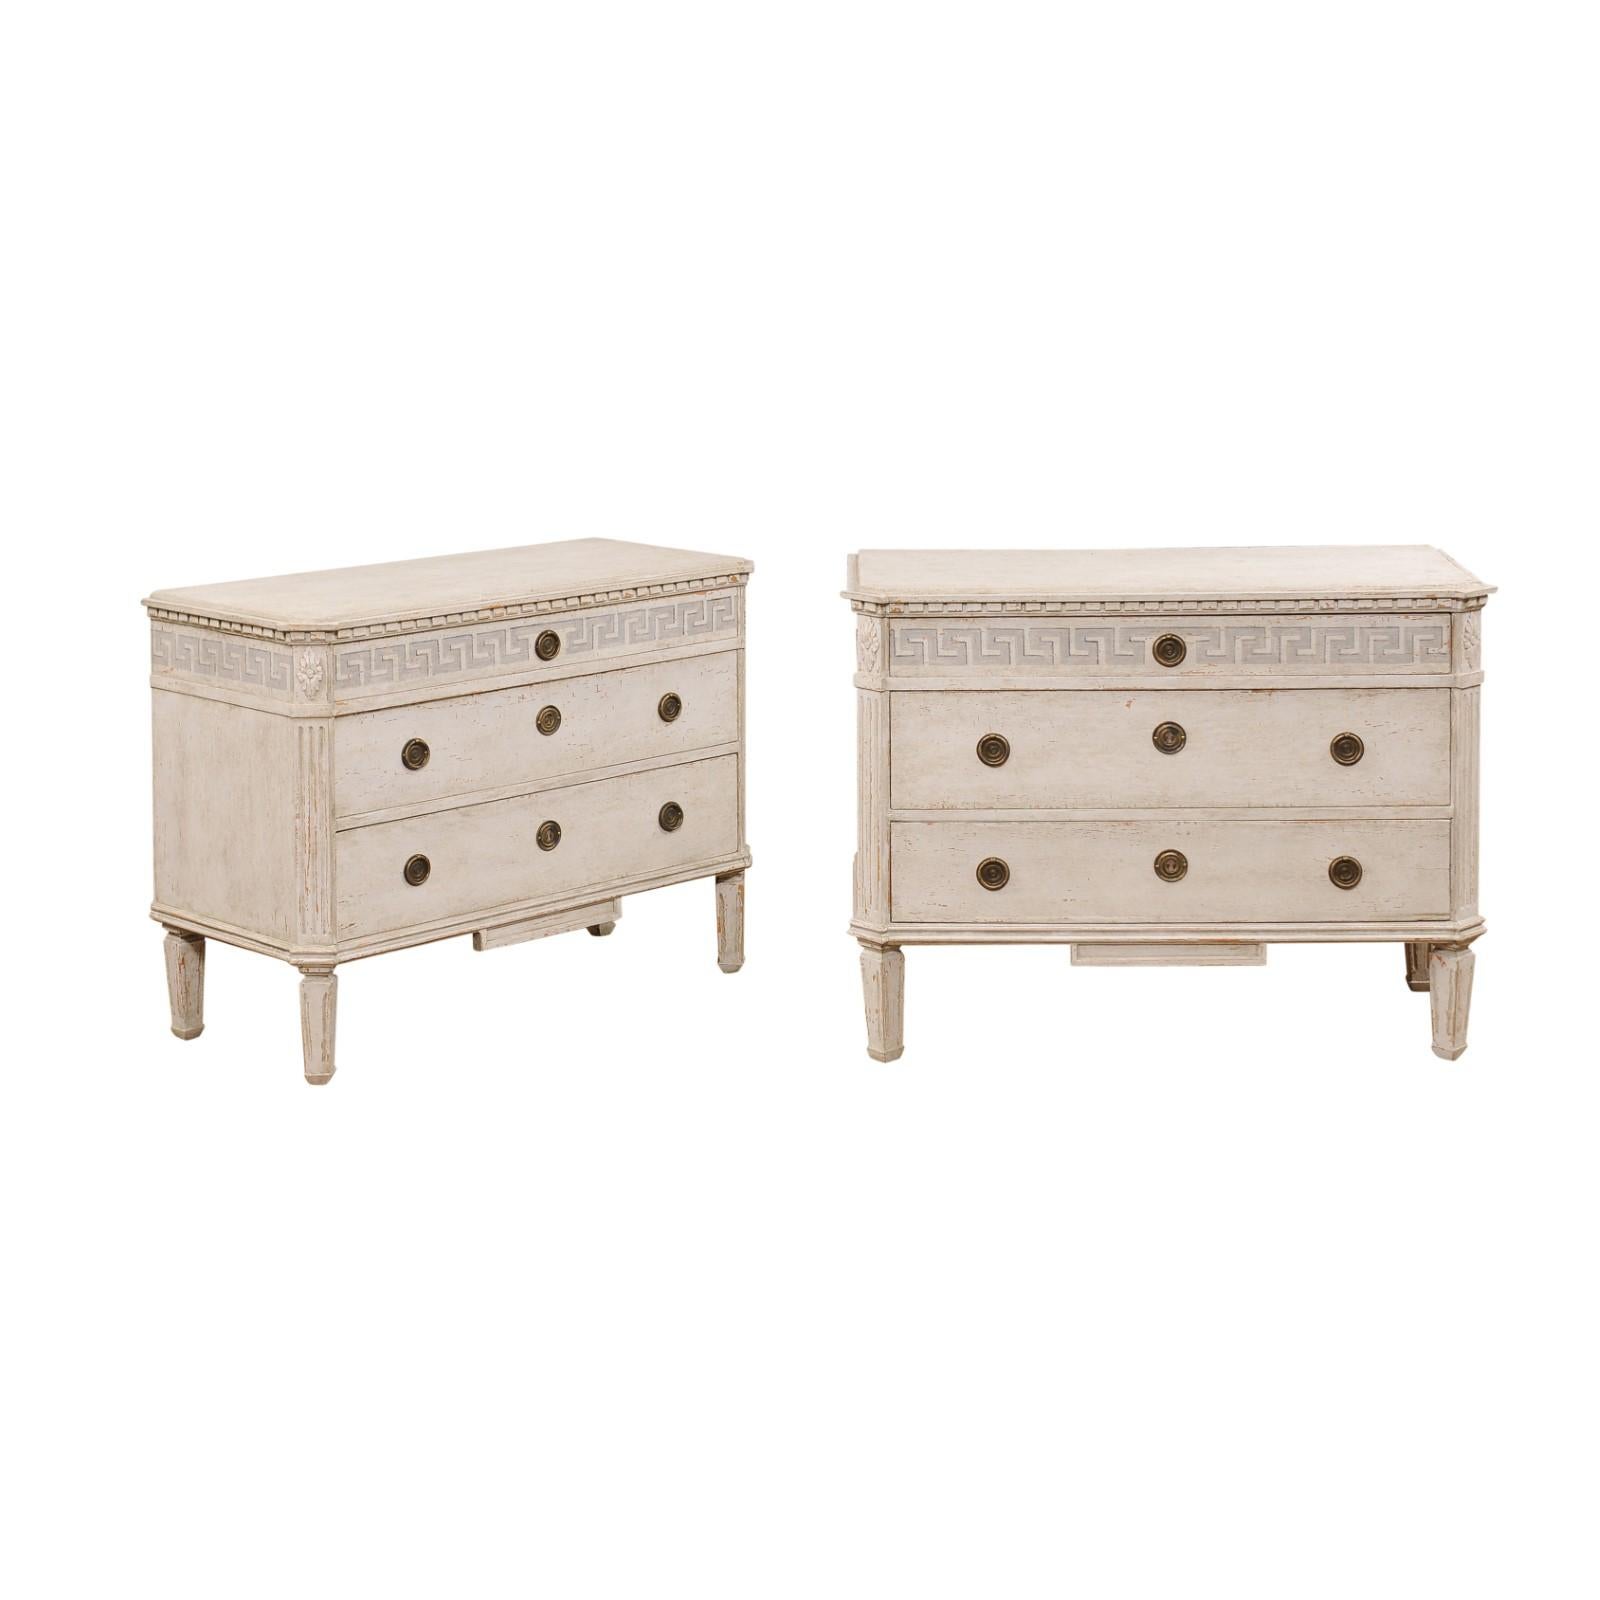 A pair of Swedish Gustavian style painted wood chests from the late 19th century with three drawers, Greek Key frieze, carved rosettes and nicely distressed finish. Created in Sweden during the last quarter of the 19th century, this pair of